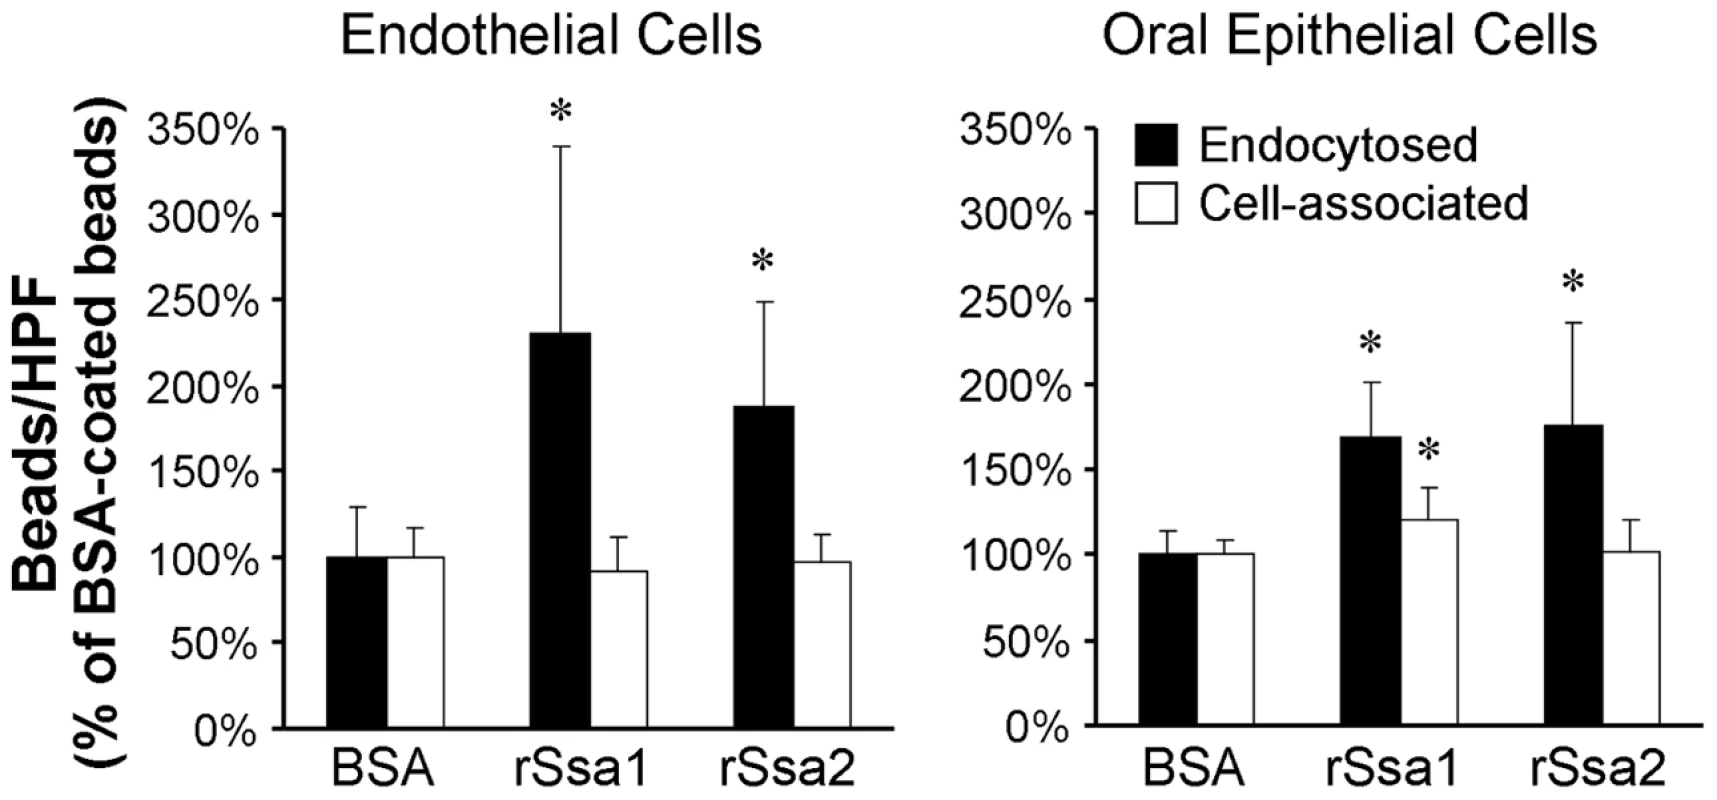 Ssa1 is sufficient to induce endocytosis by host cells.